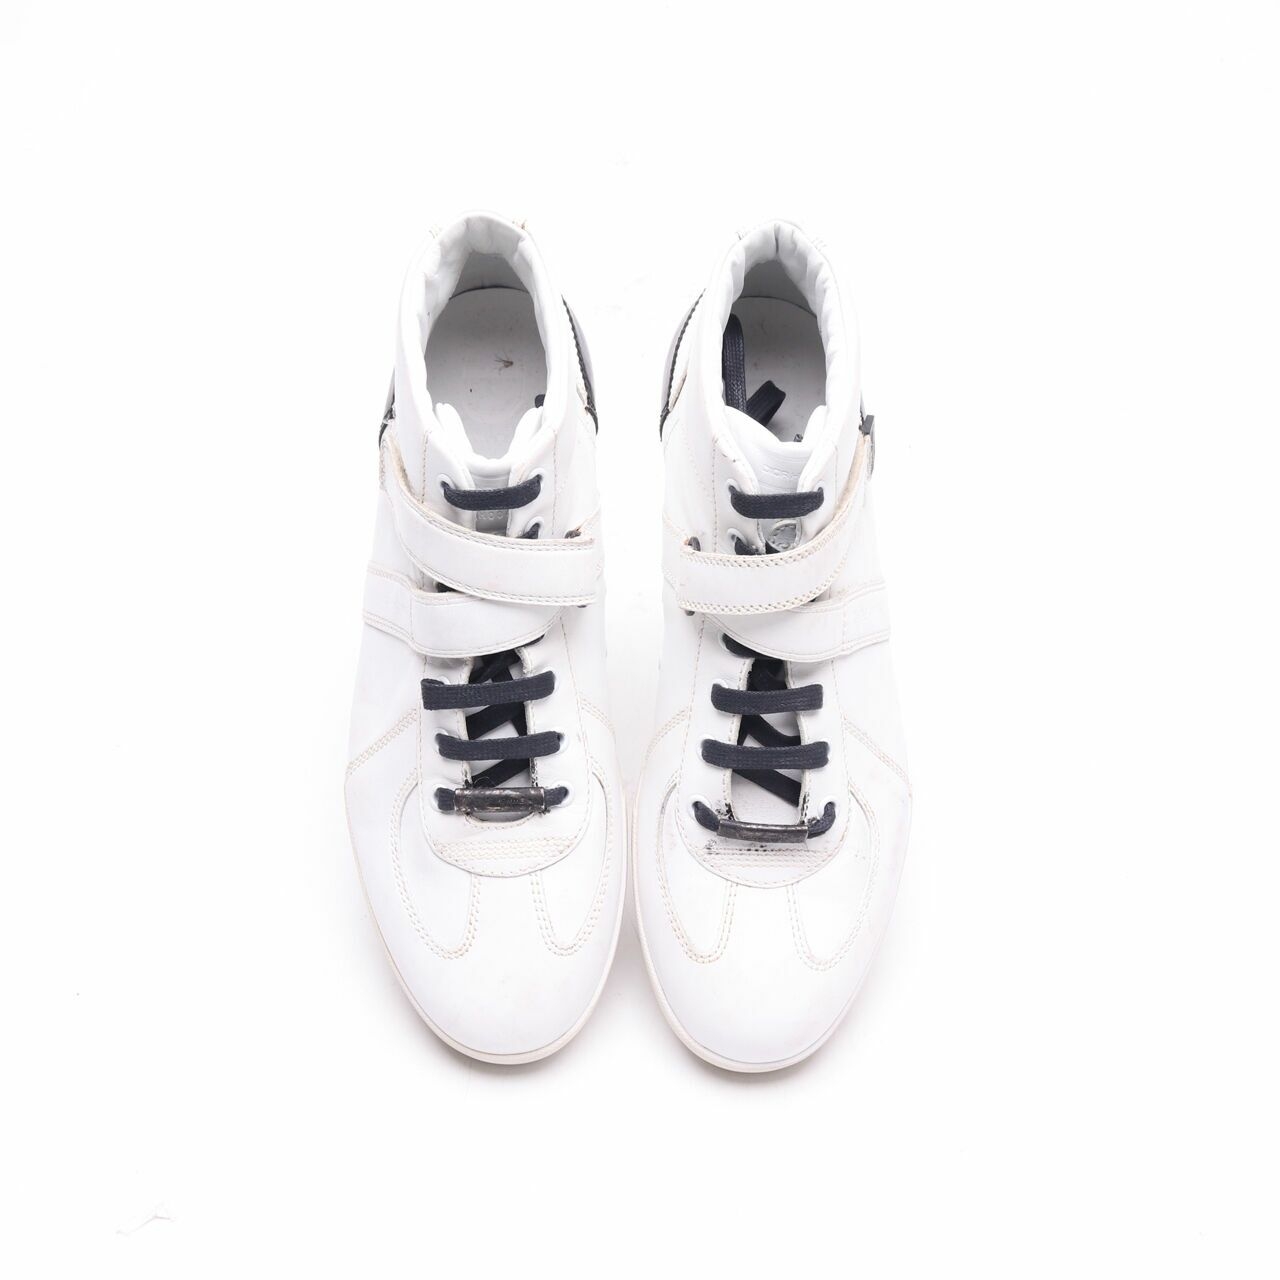 Christian Dior White Mid-Top Sneakers